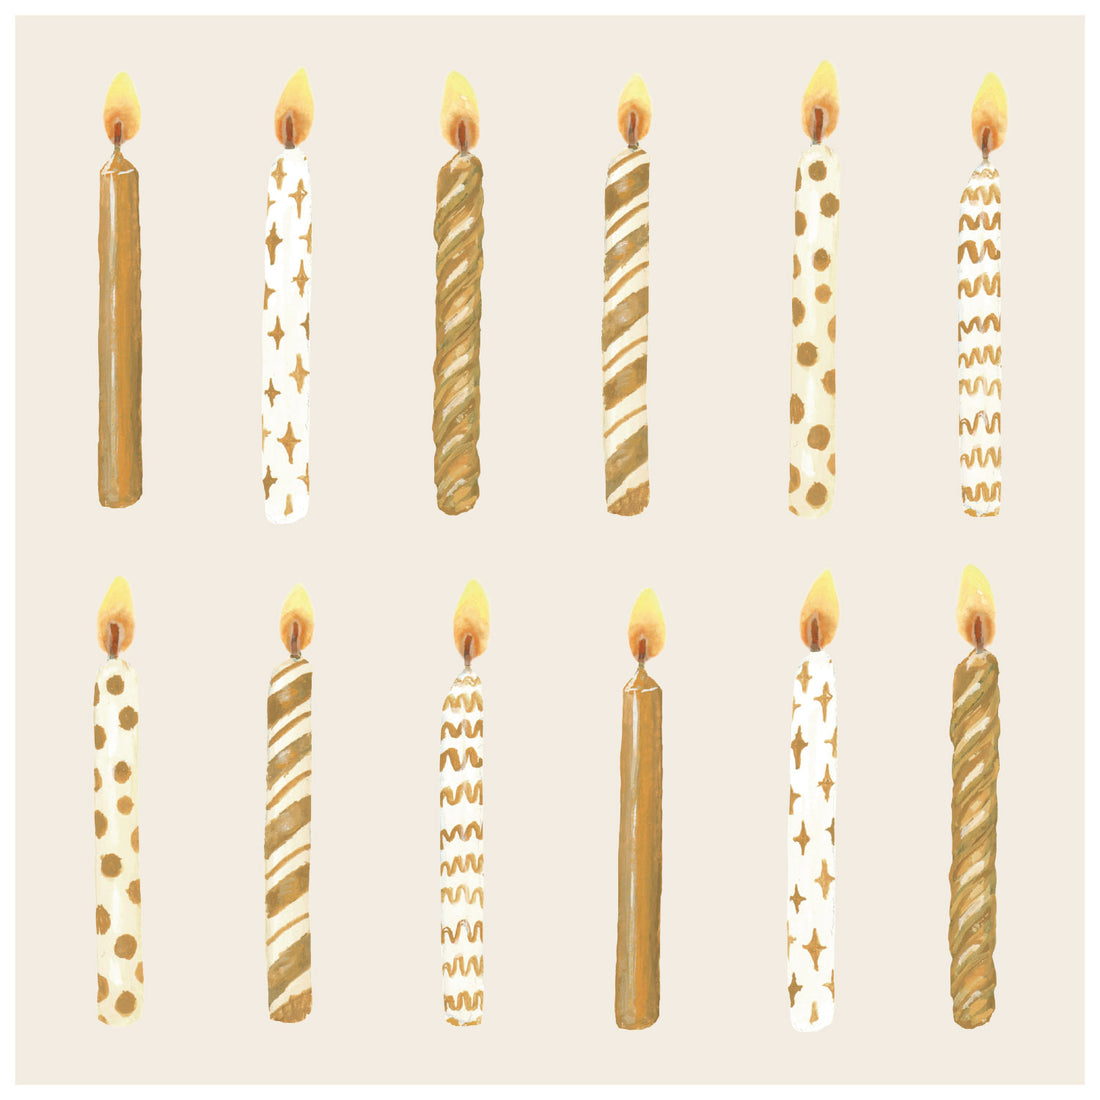 A square, cream-colored cocktail napkin featuring a dozen differently designed gold and white lit birthday candles evenly spaced in two rows.